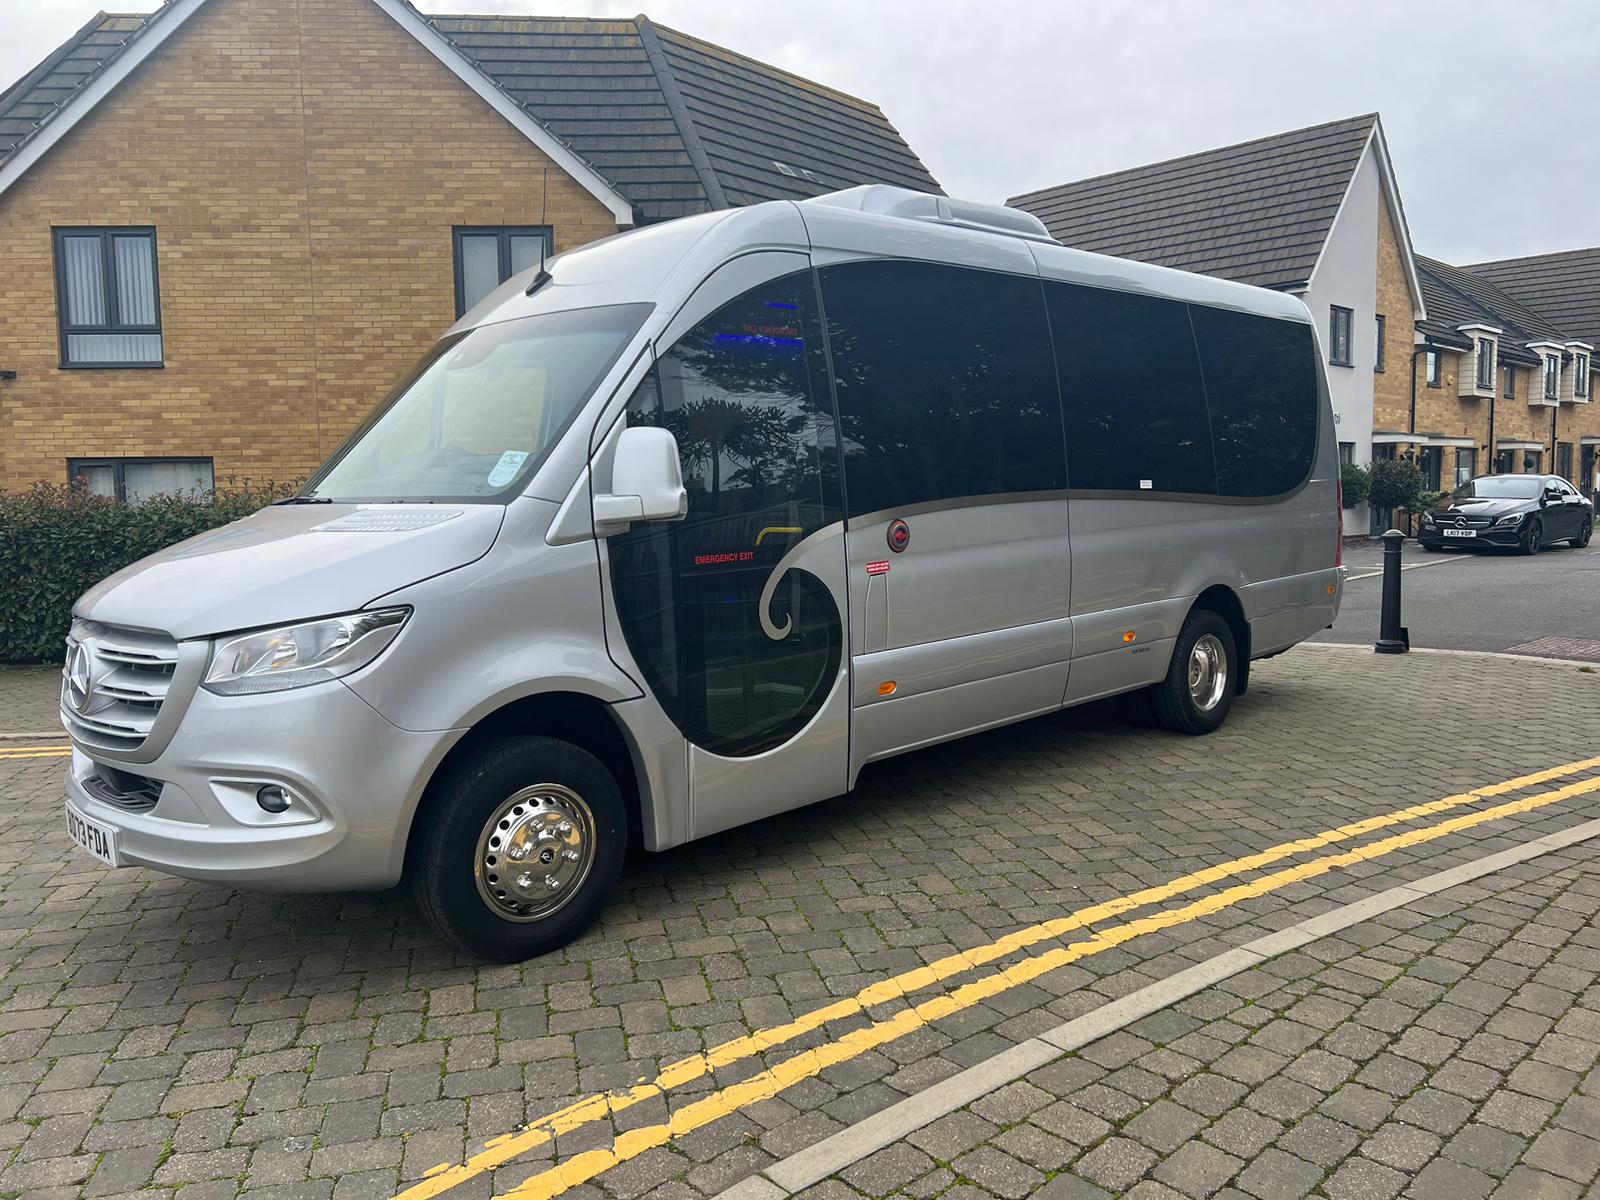 How to Choose the Best Minibus Hire Service in the UK